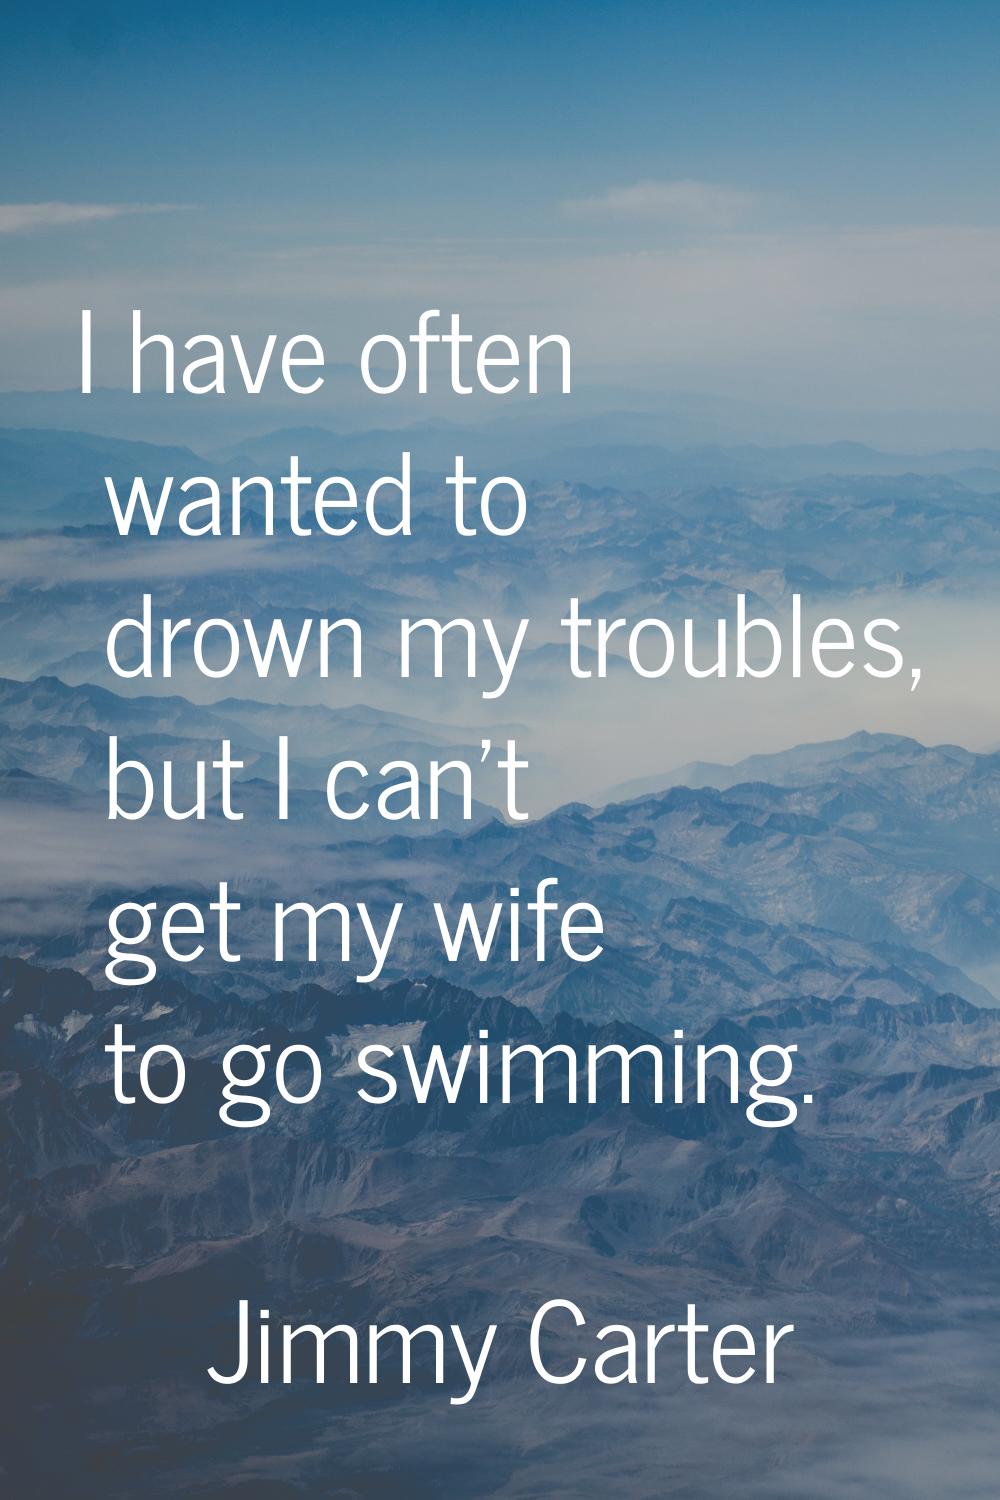 I have often wanted to drown my troubles, but I can't get my wife to go swimming.